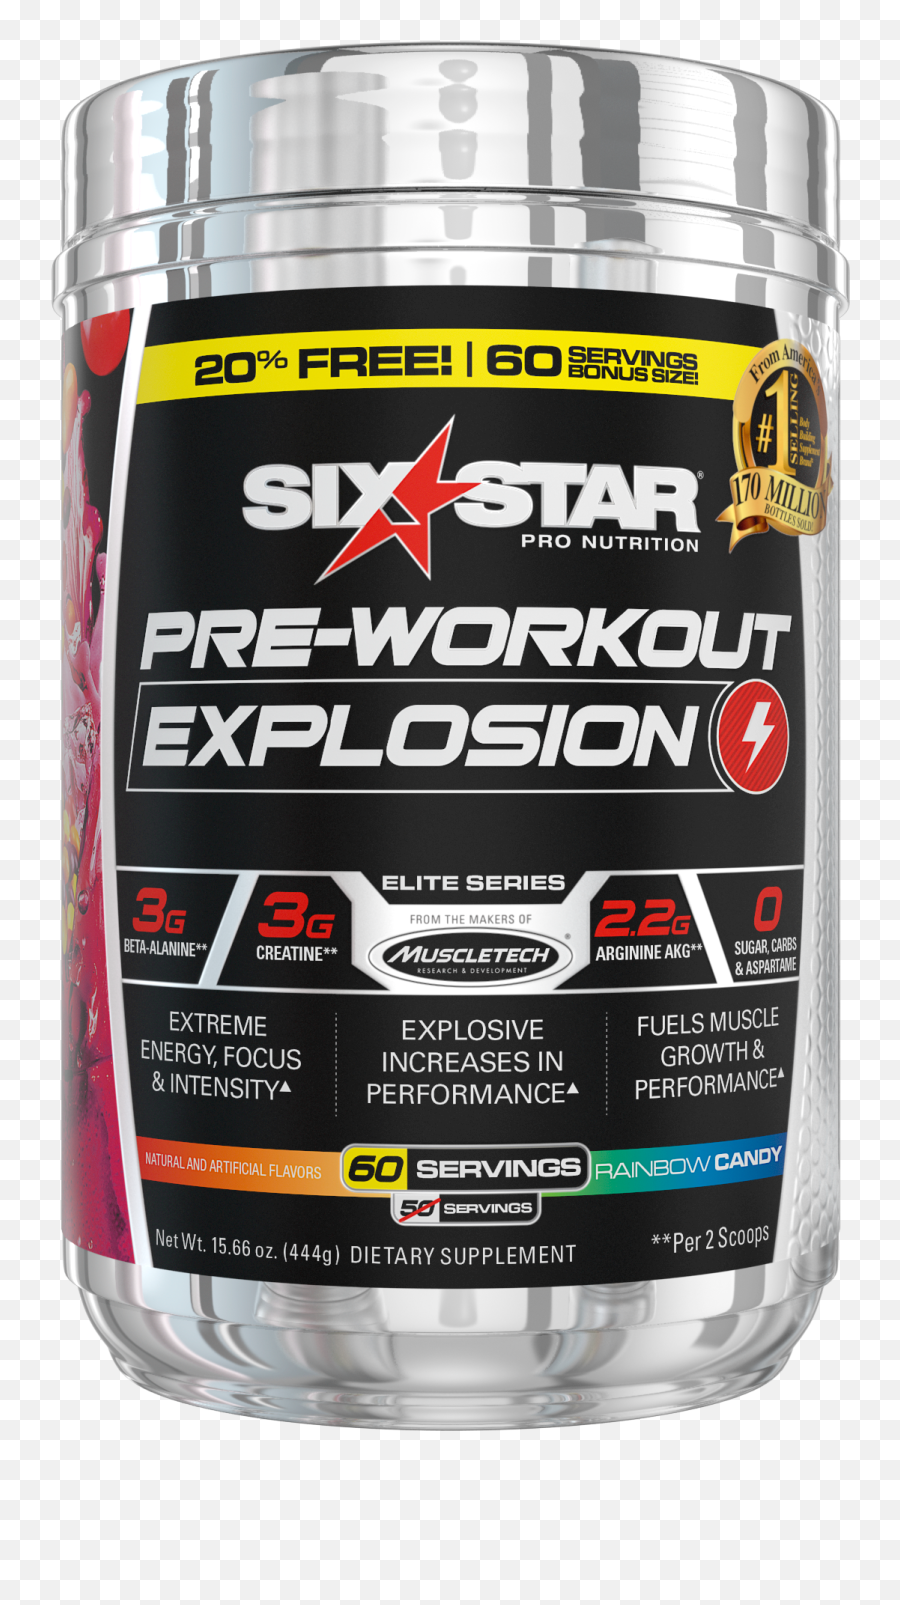 Elite Series Explosion Pre Workout Powder Extreme Energy Focus And Intensity For Better Workouts Rainbow Candy 60 Servings - Walmartcom Six Star Pre Workout Explosion Walmart Emoji,Work Emotions Rims